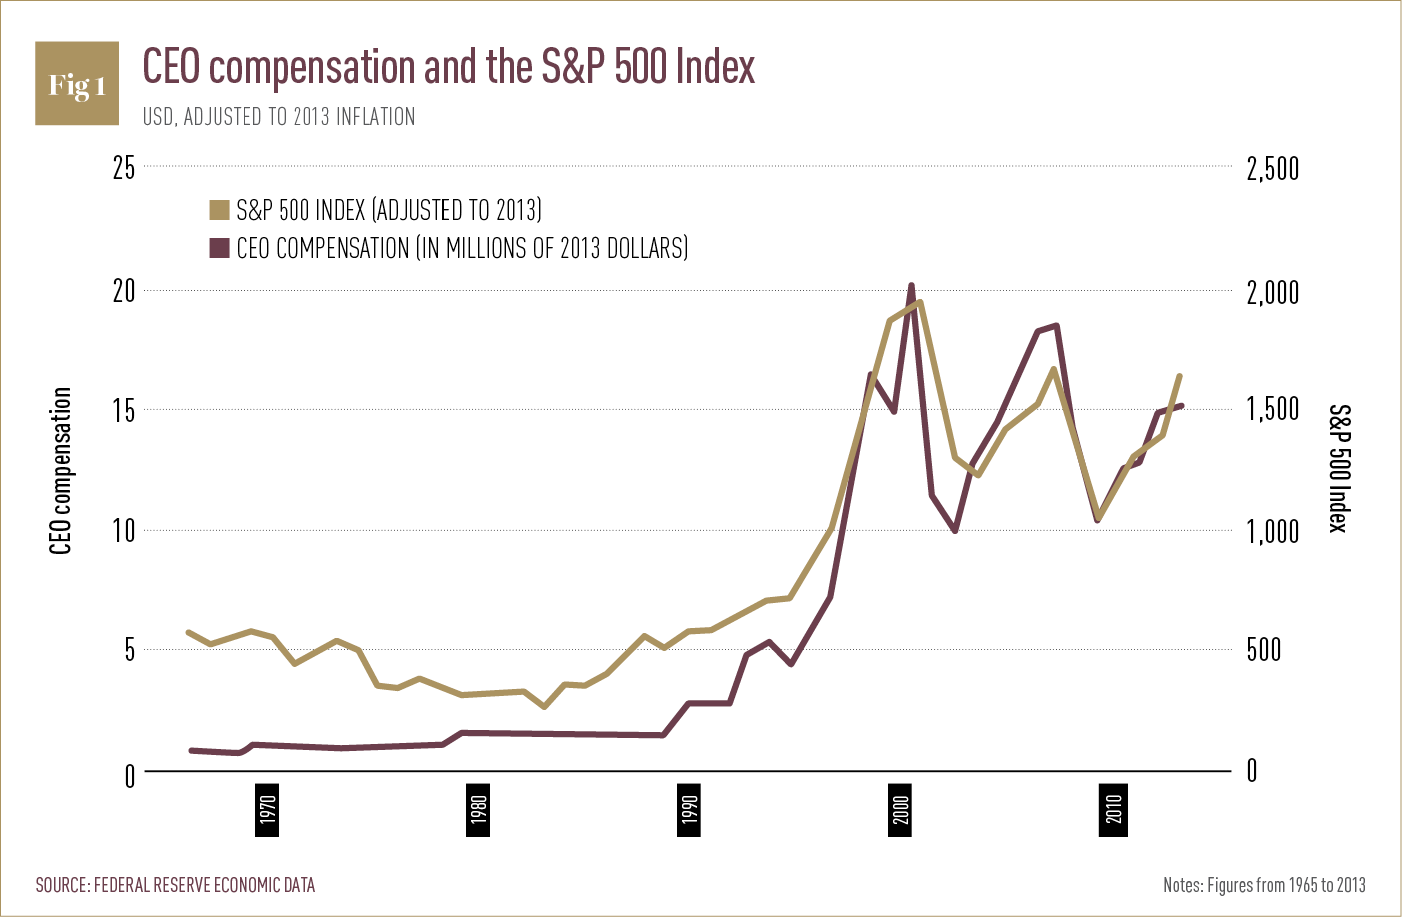 CEO compensation and the S&P 500 Index